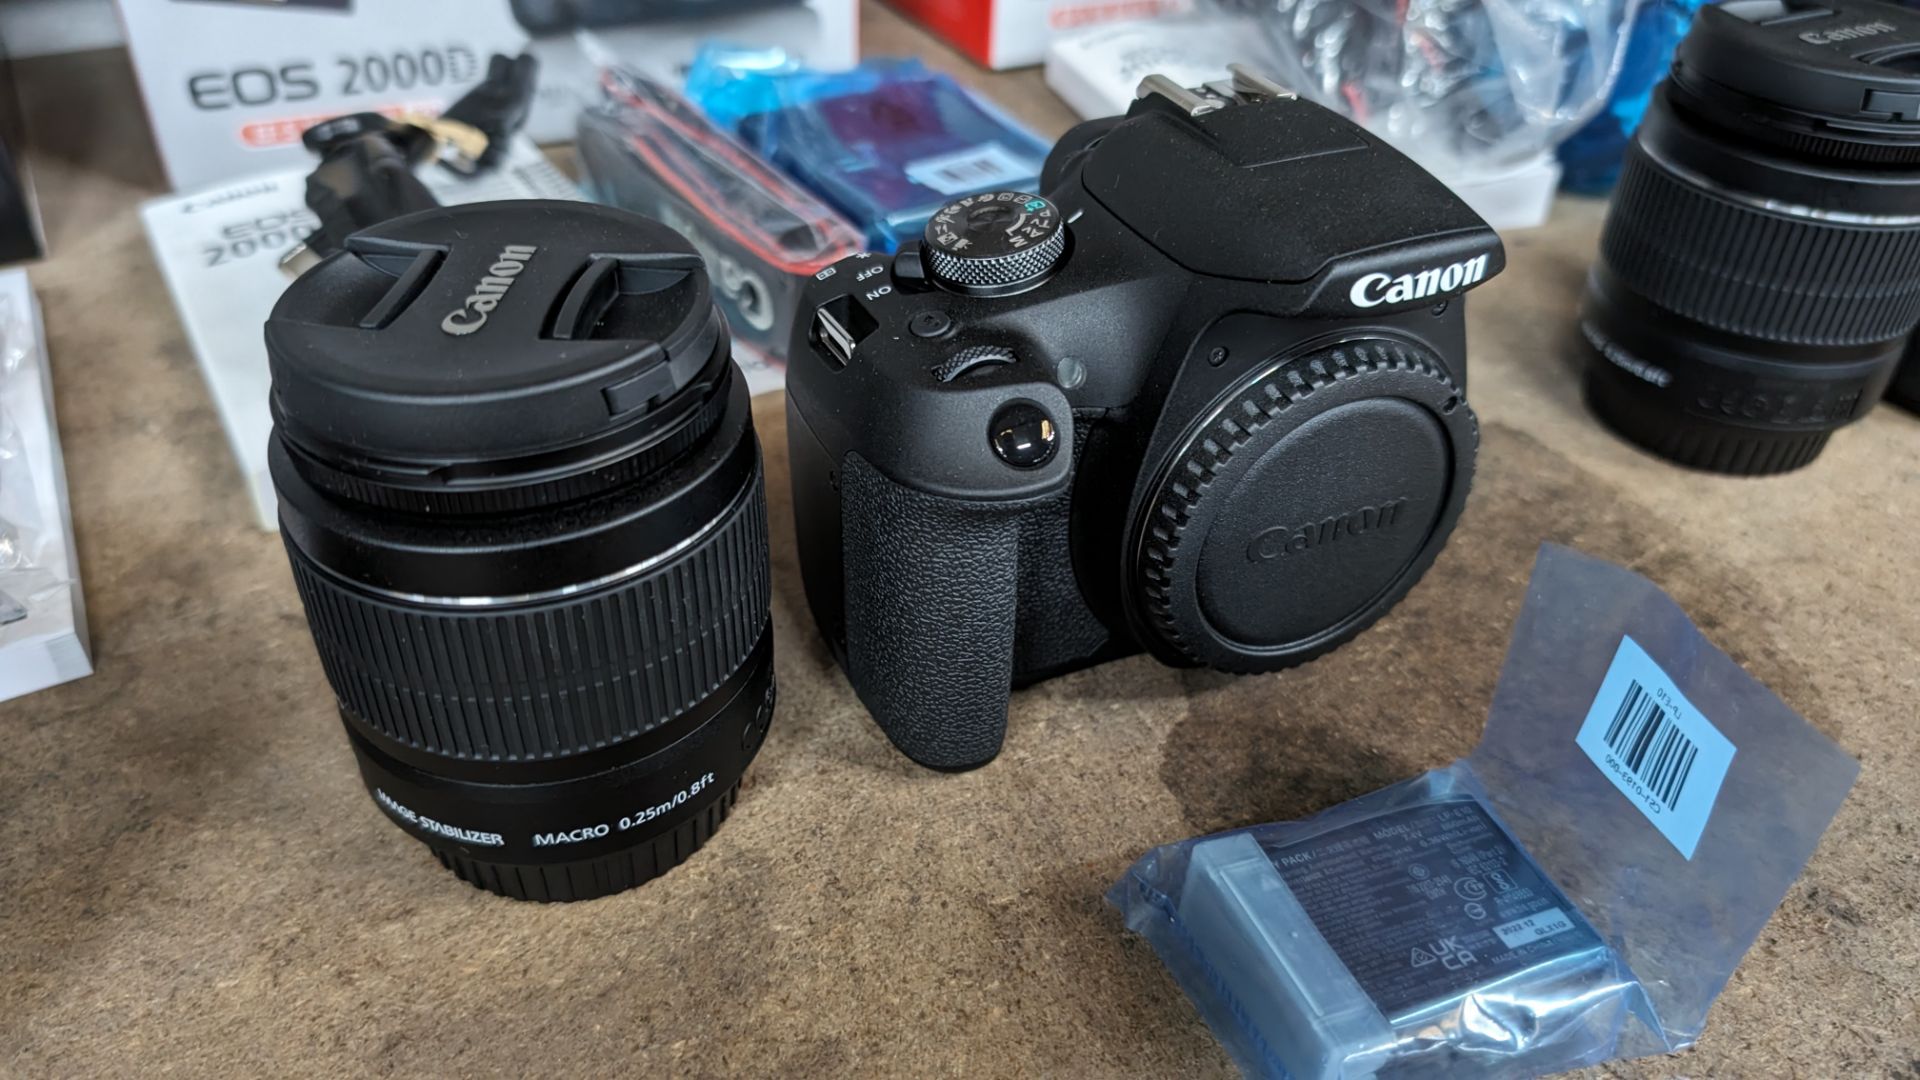 Canon EOS 2000D camera with EFS 18-55mm lens plus battery, charger, strap and more - Image 4 of 16